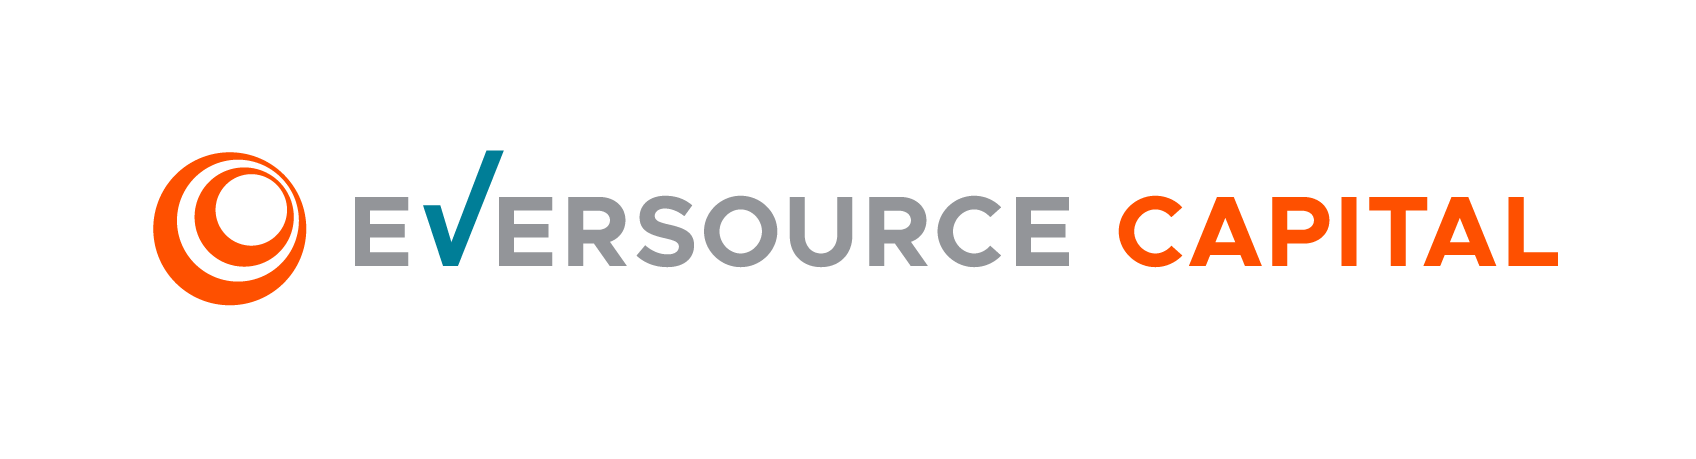 Eversource Capital